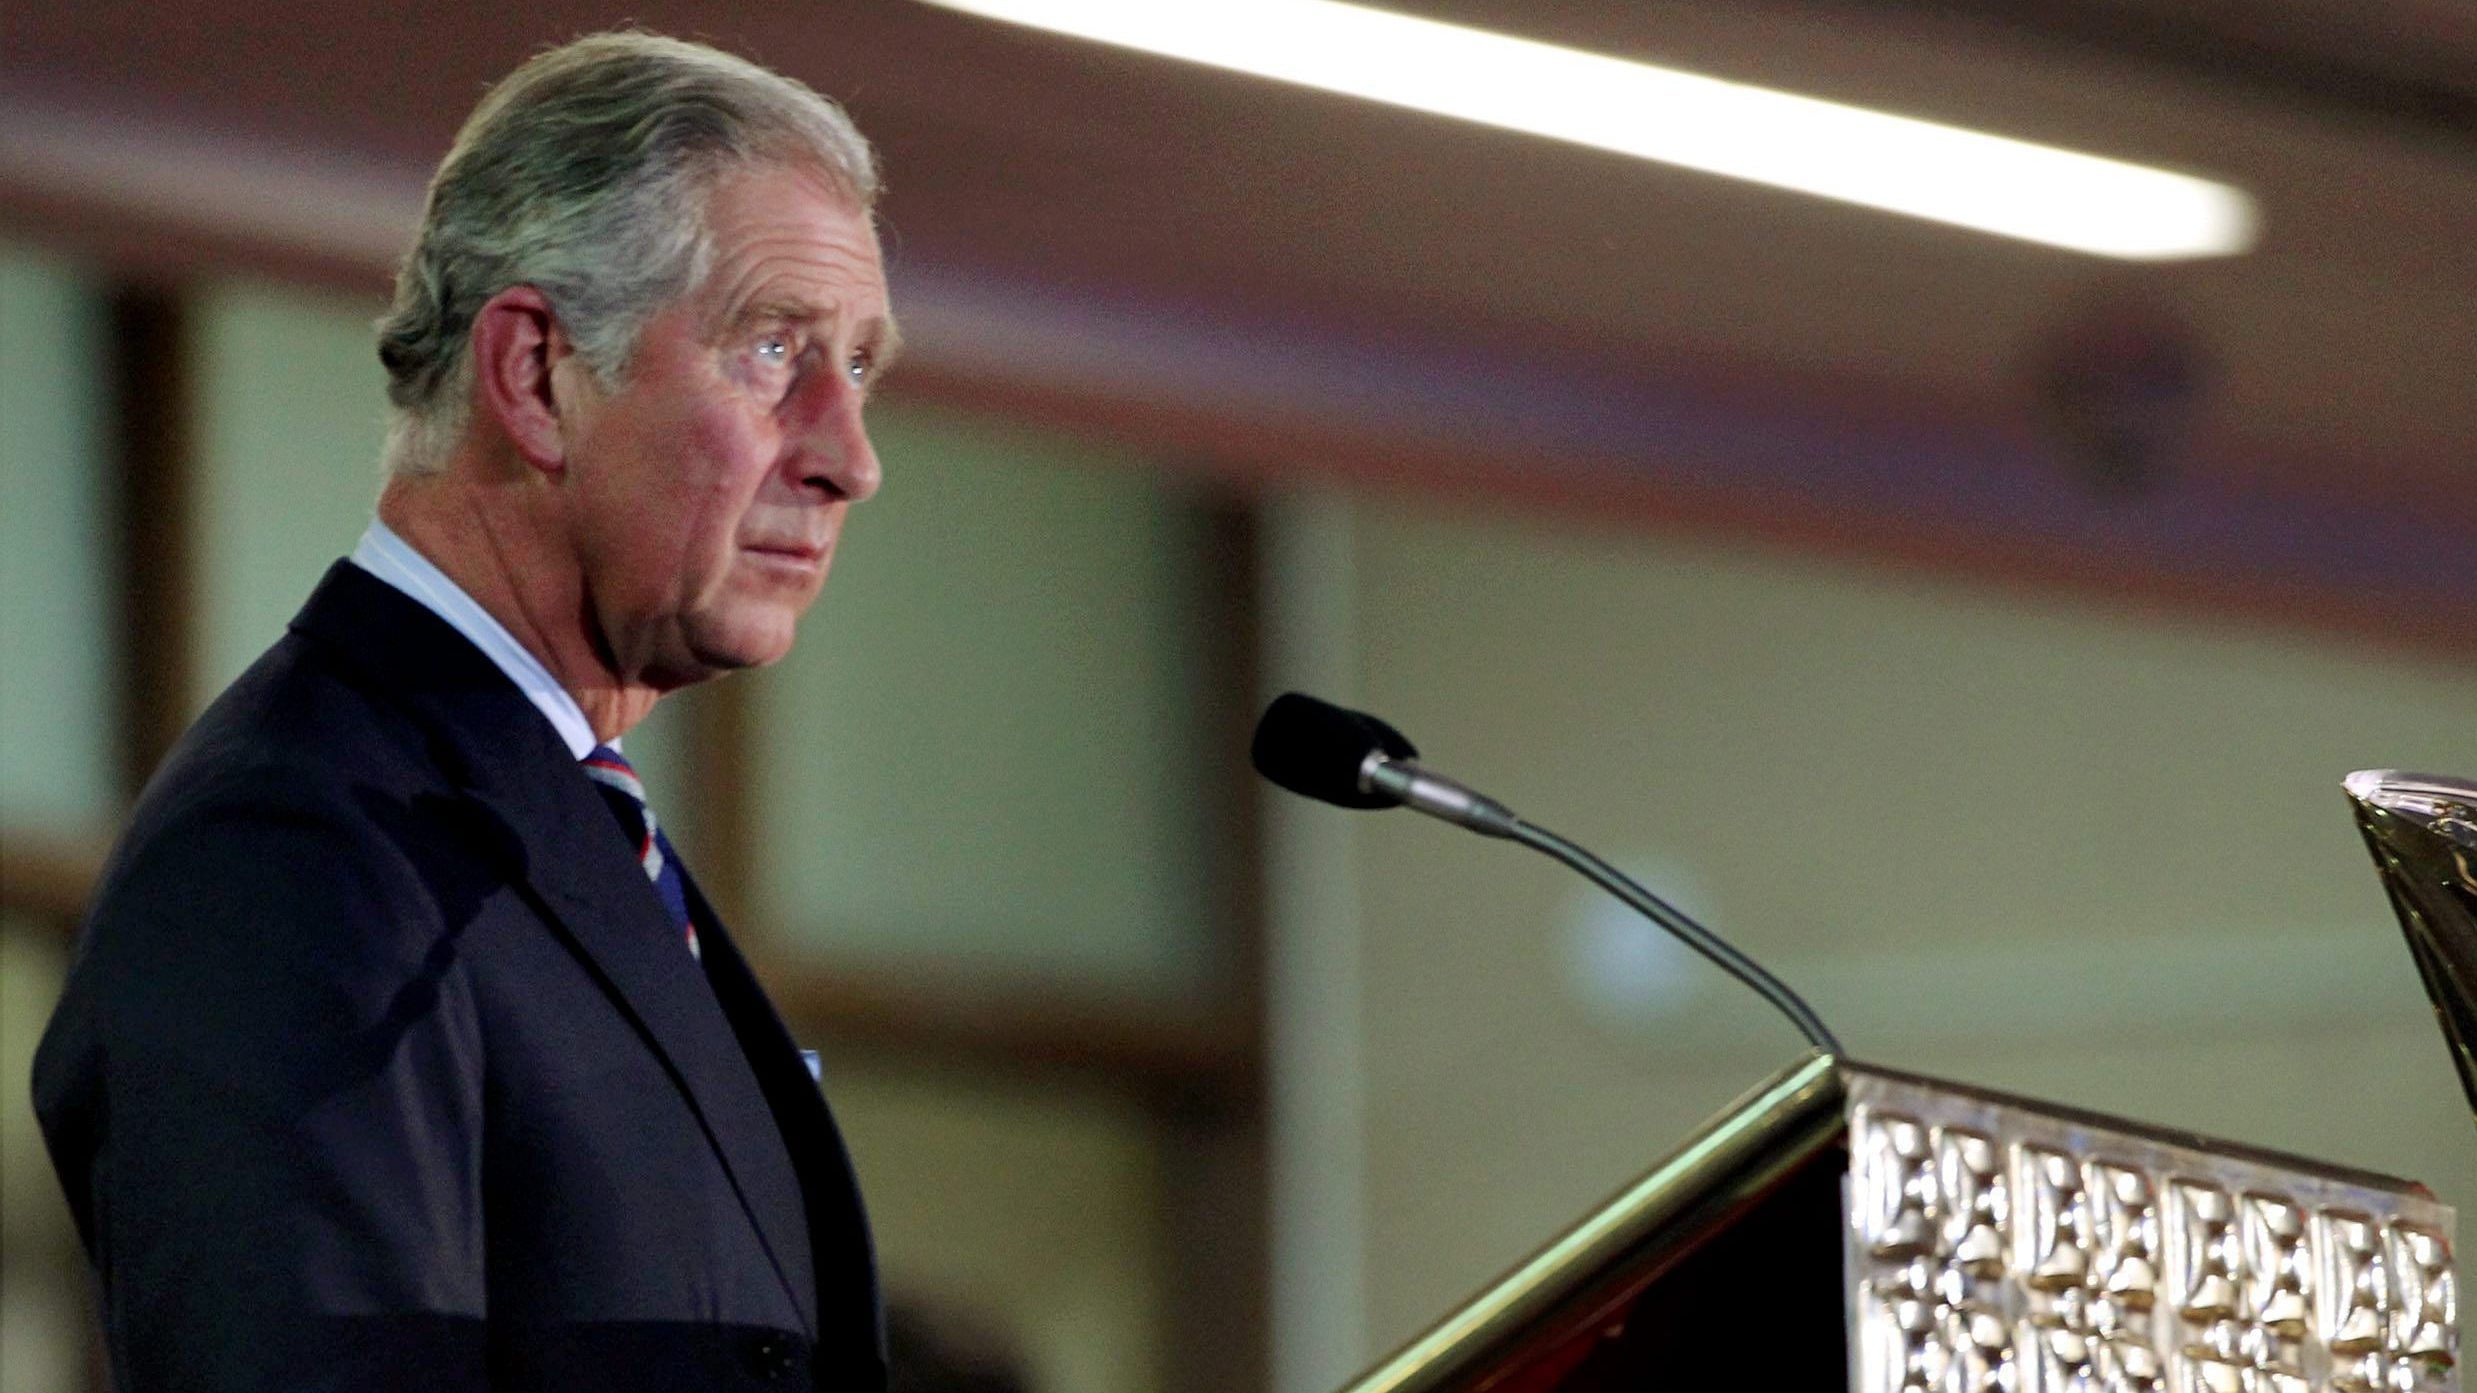 Charles found aspects of life hard at a school that had rugged practices such as sending pupils on early morning runs followed by a cold shower. Credit: PTI Photo